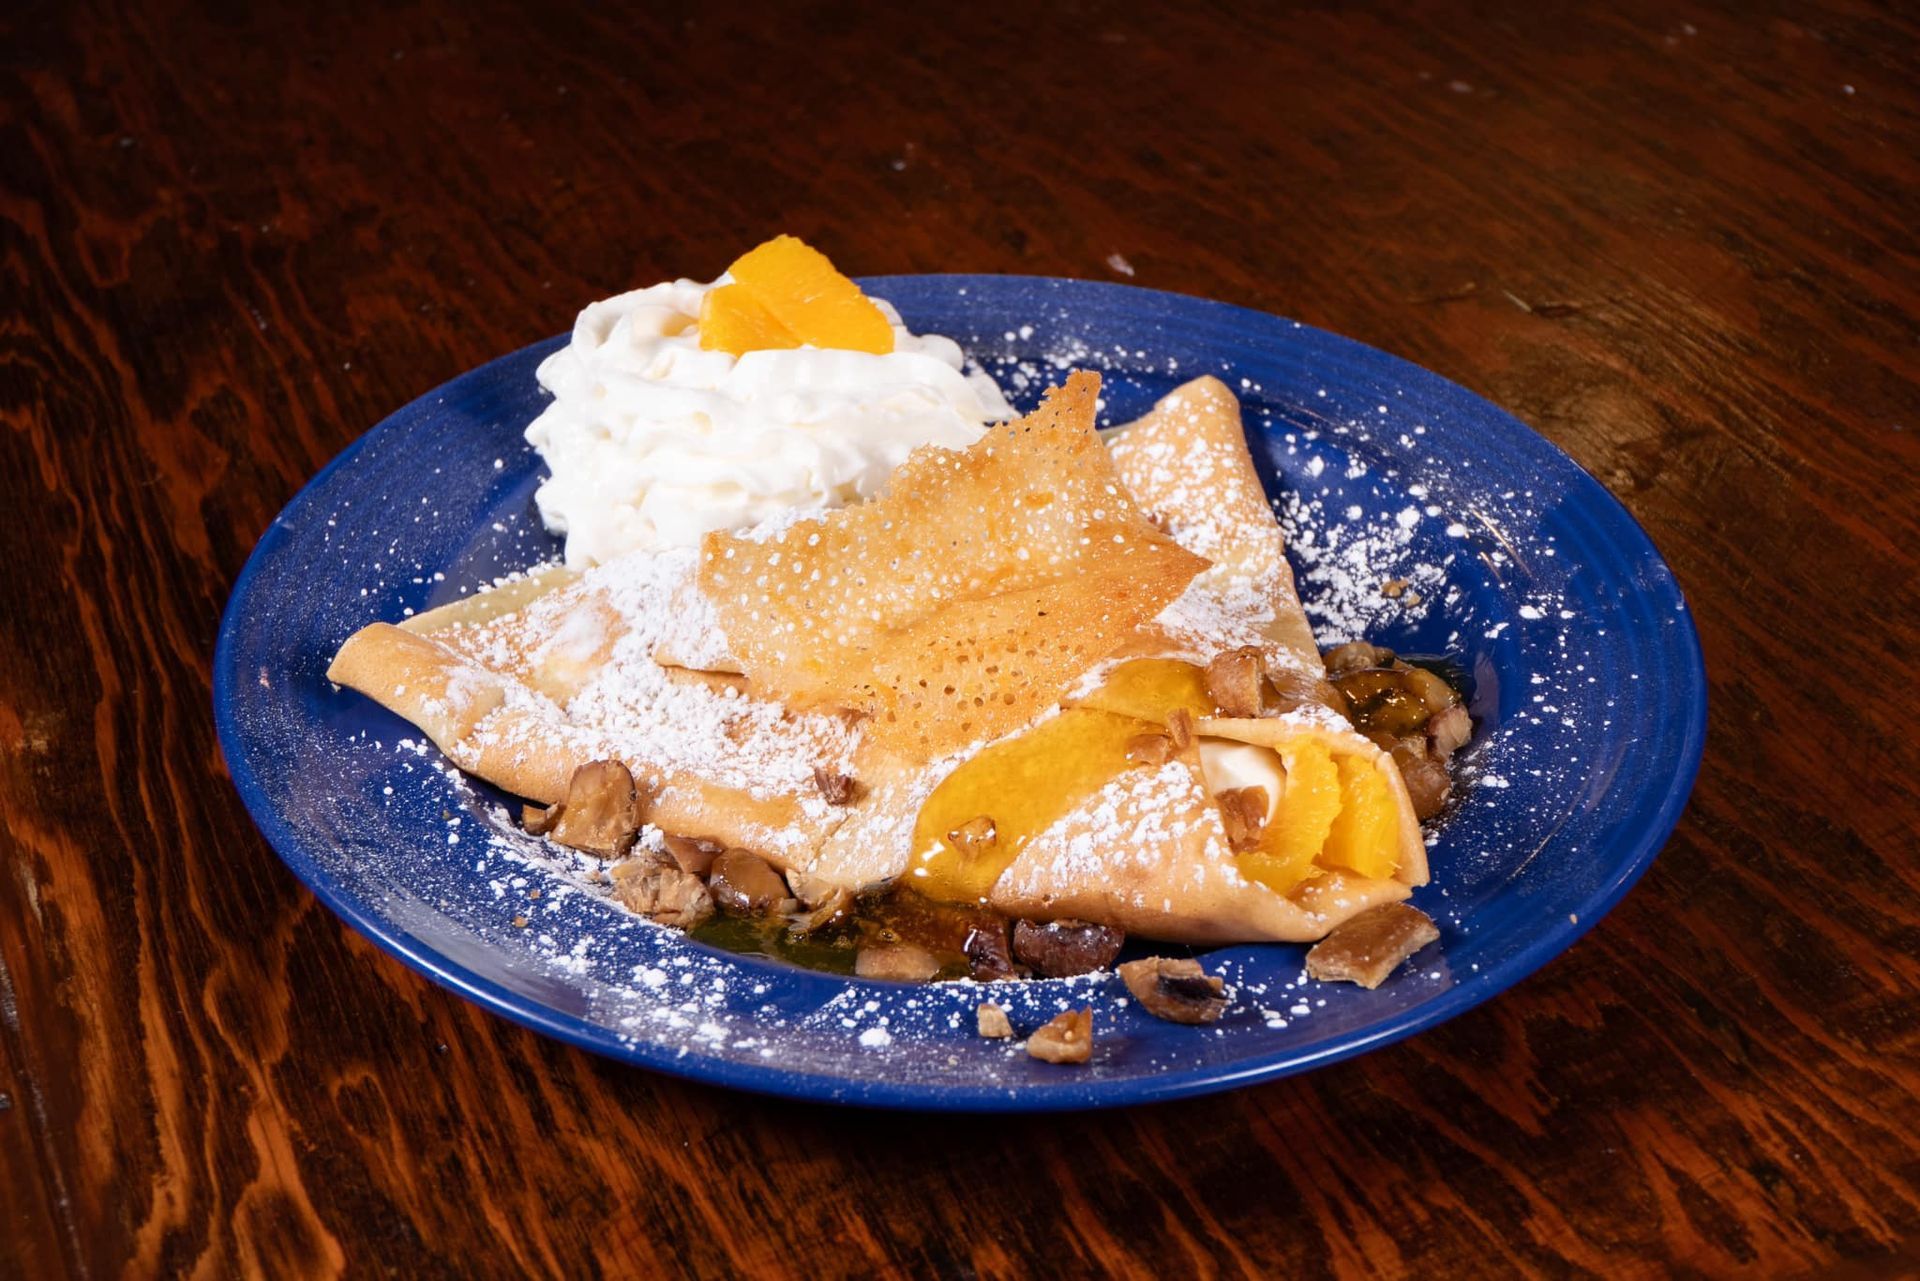 A blue plate topped with a crepe and whipped cream